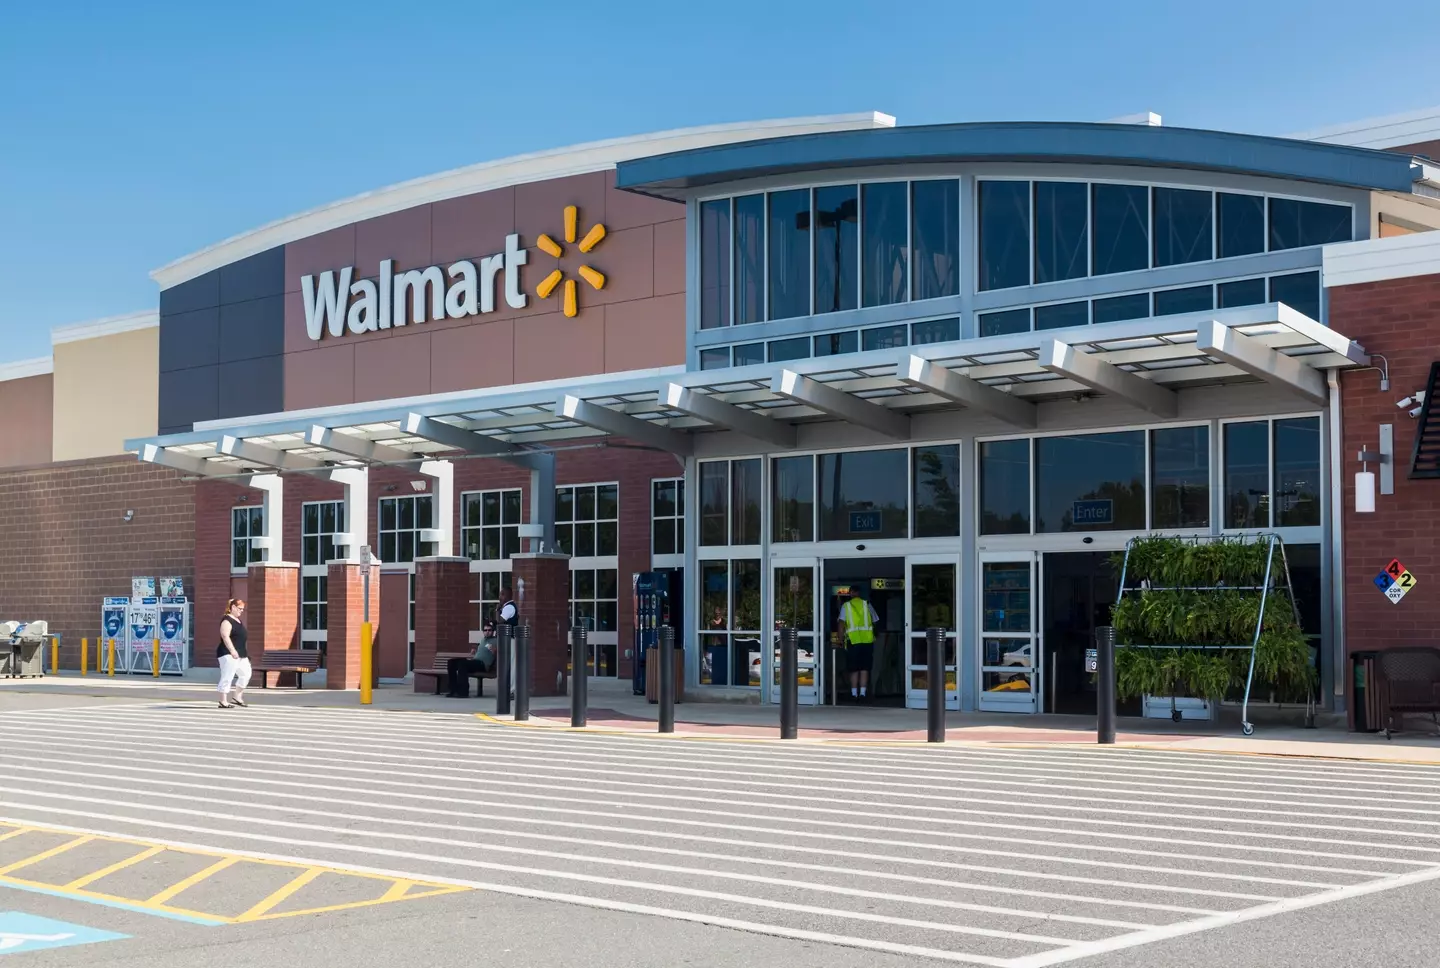 The agency listed Walmart as somewhere strawberries may have been bought.